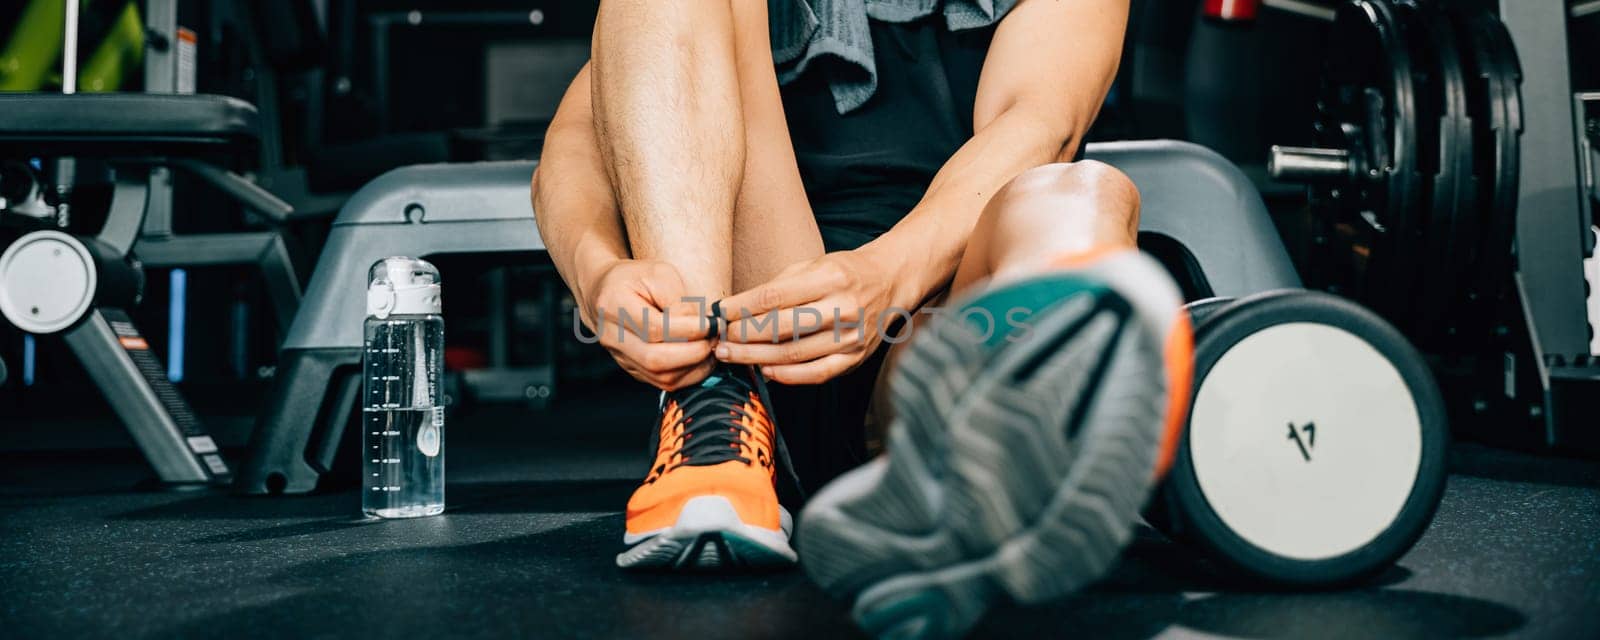 male athlete is tying his shoelace before a workout by Sorapop